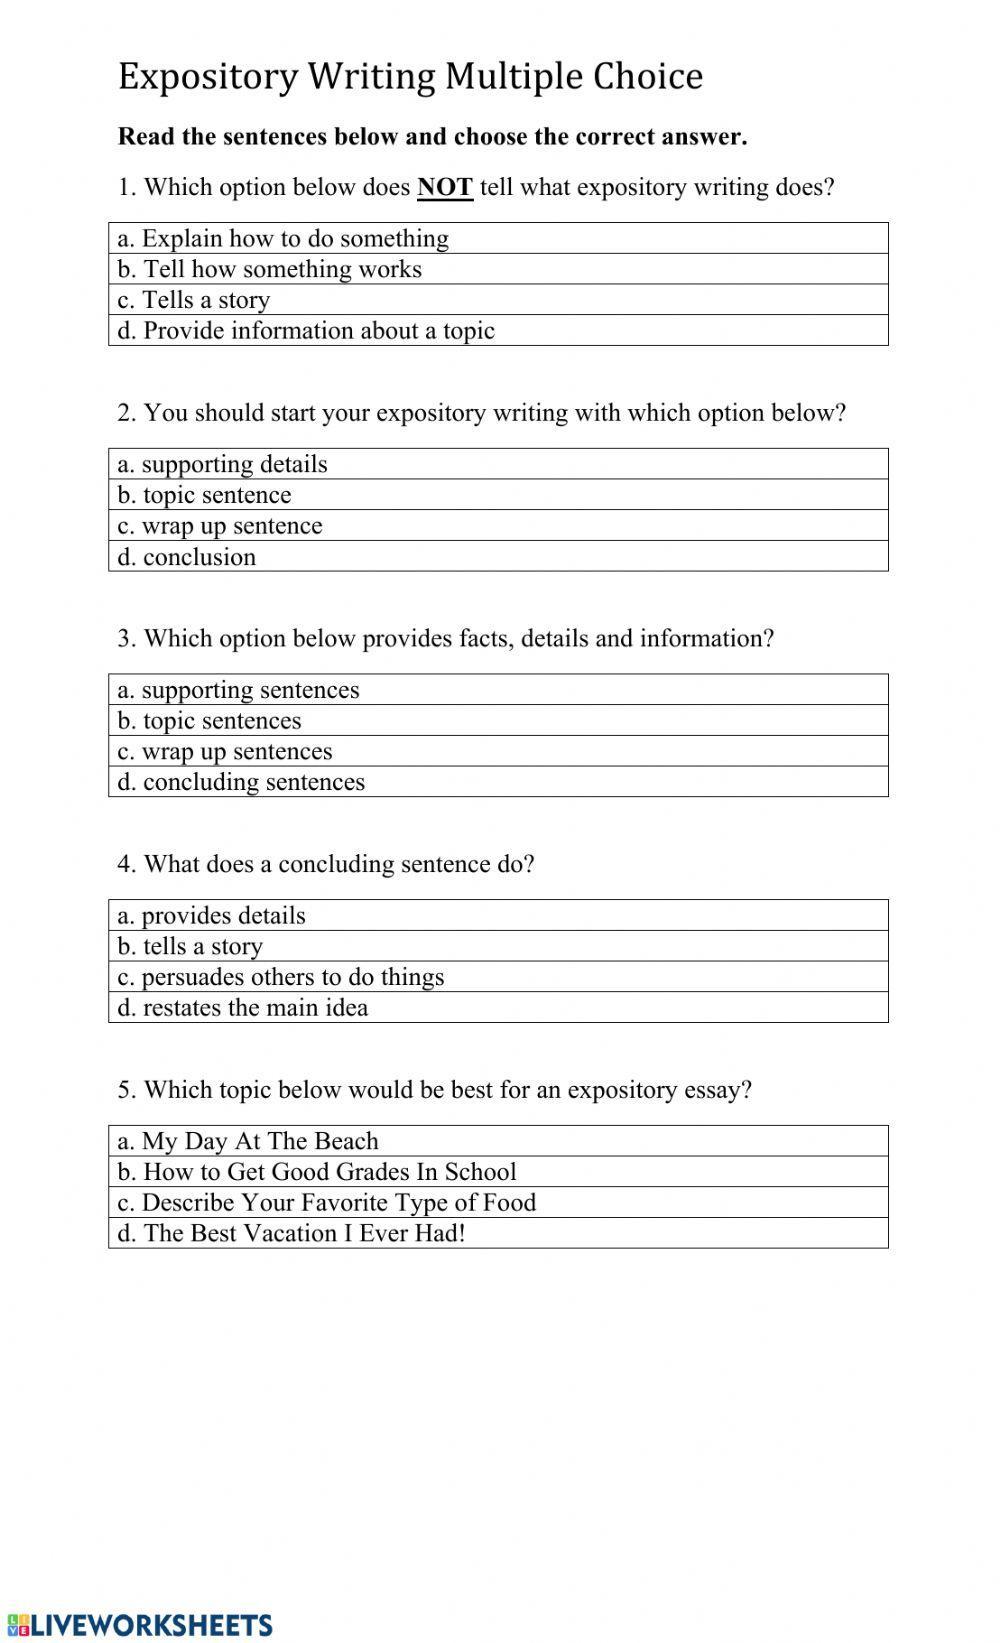 Expository Writing Multiple Choice